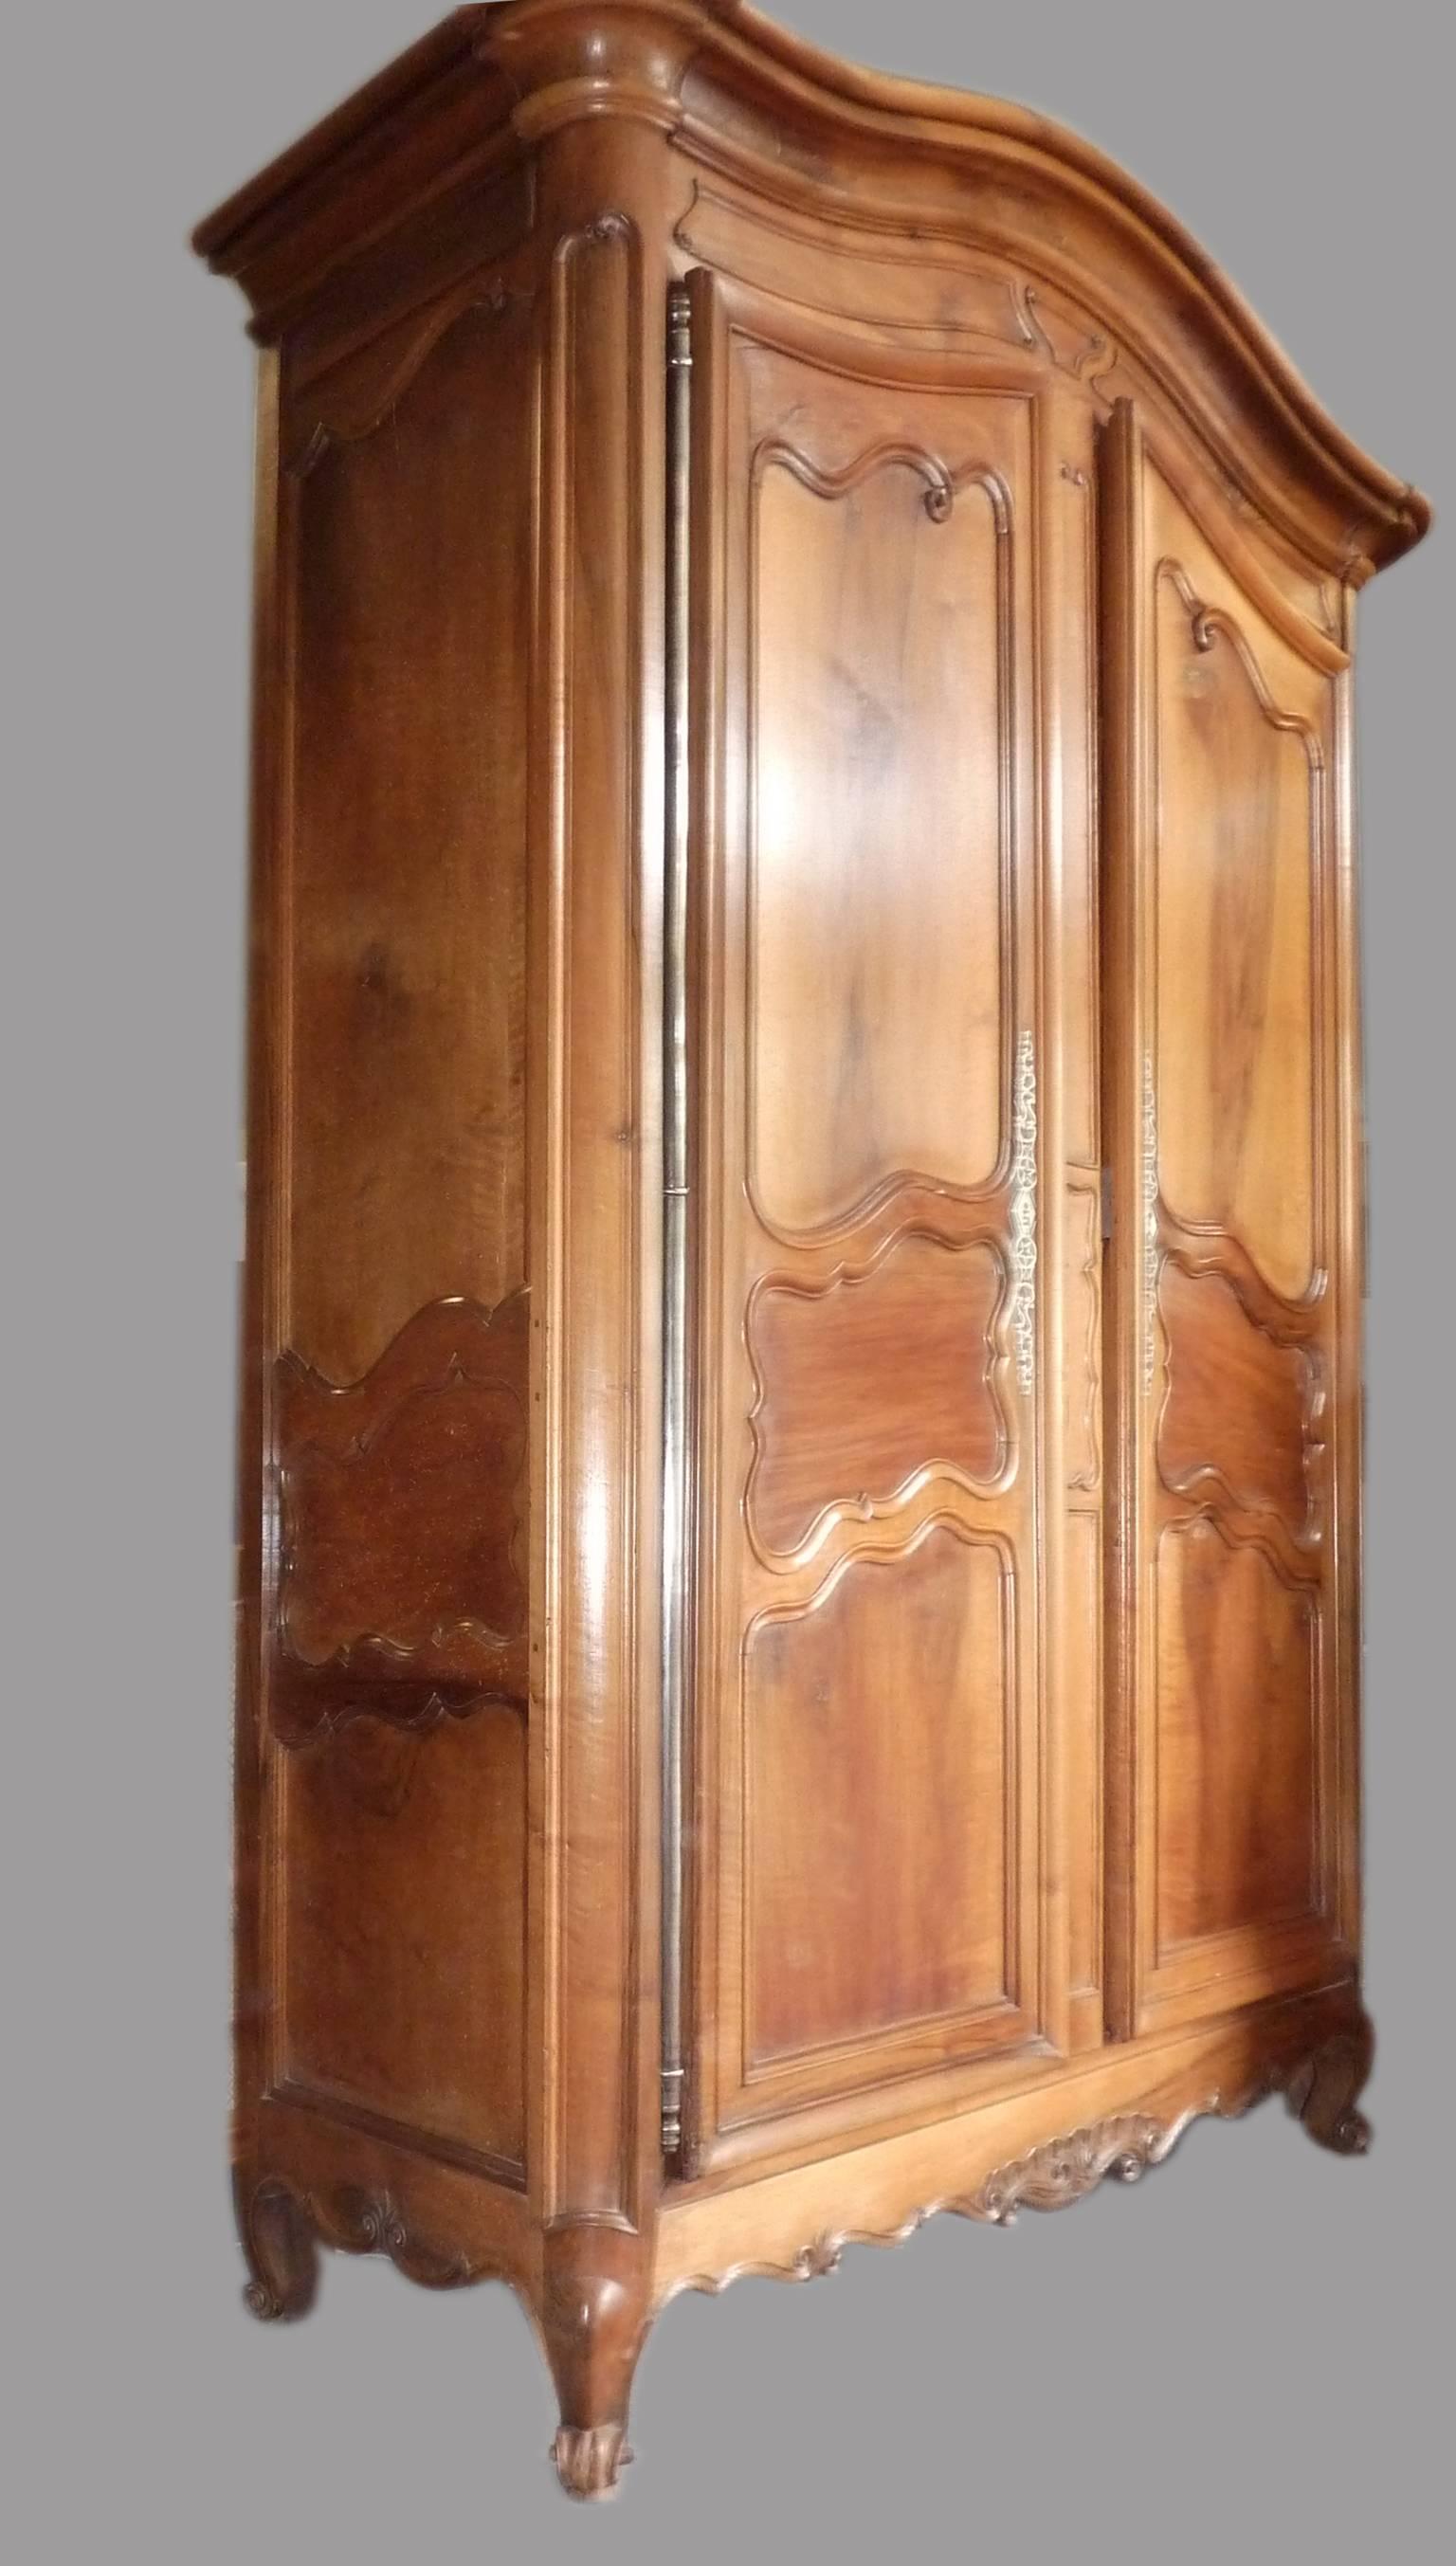 Coming from a Bordeaux castle, this very large French Wardrobe armoire in blond walnut
with impressive wrought ironwork. Gorgeous piece.
France, 18th century.